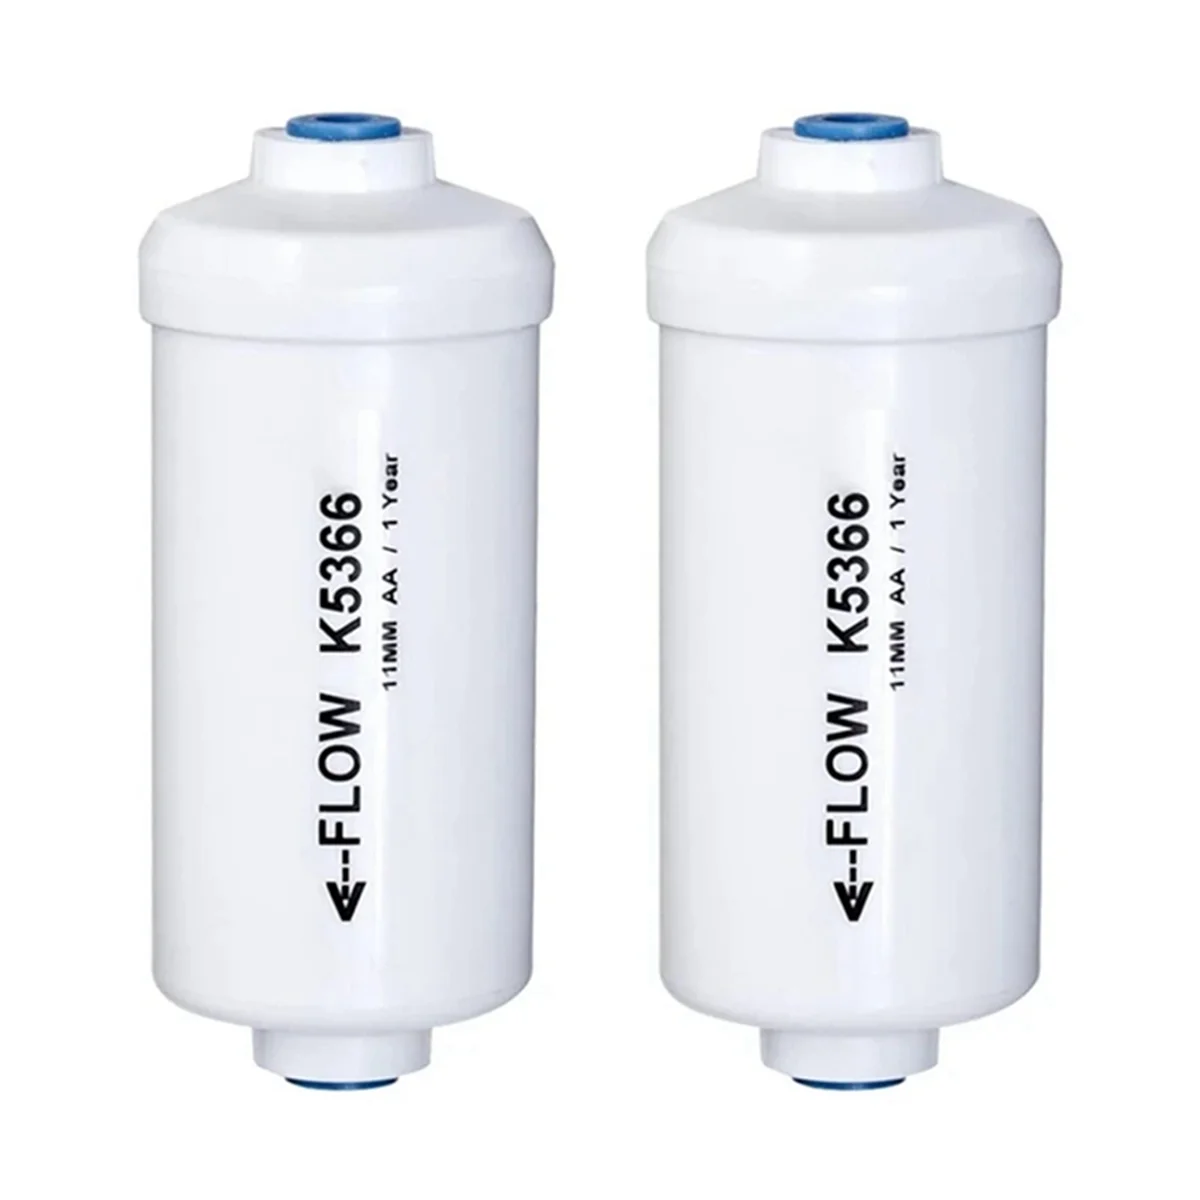 

2 Pcs Replacement Fluoride Water Filter K5366 Compatible with Gravity Water Filtering System Purification Elements